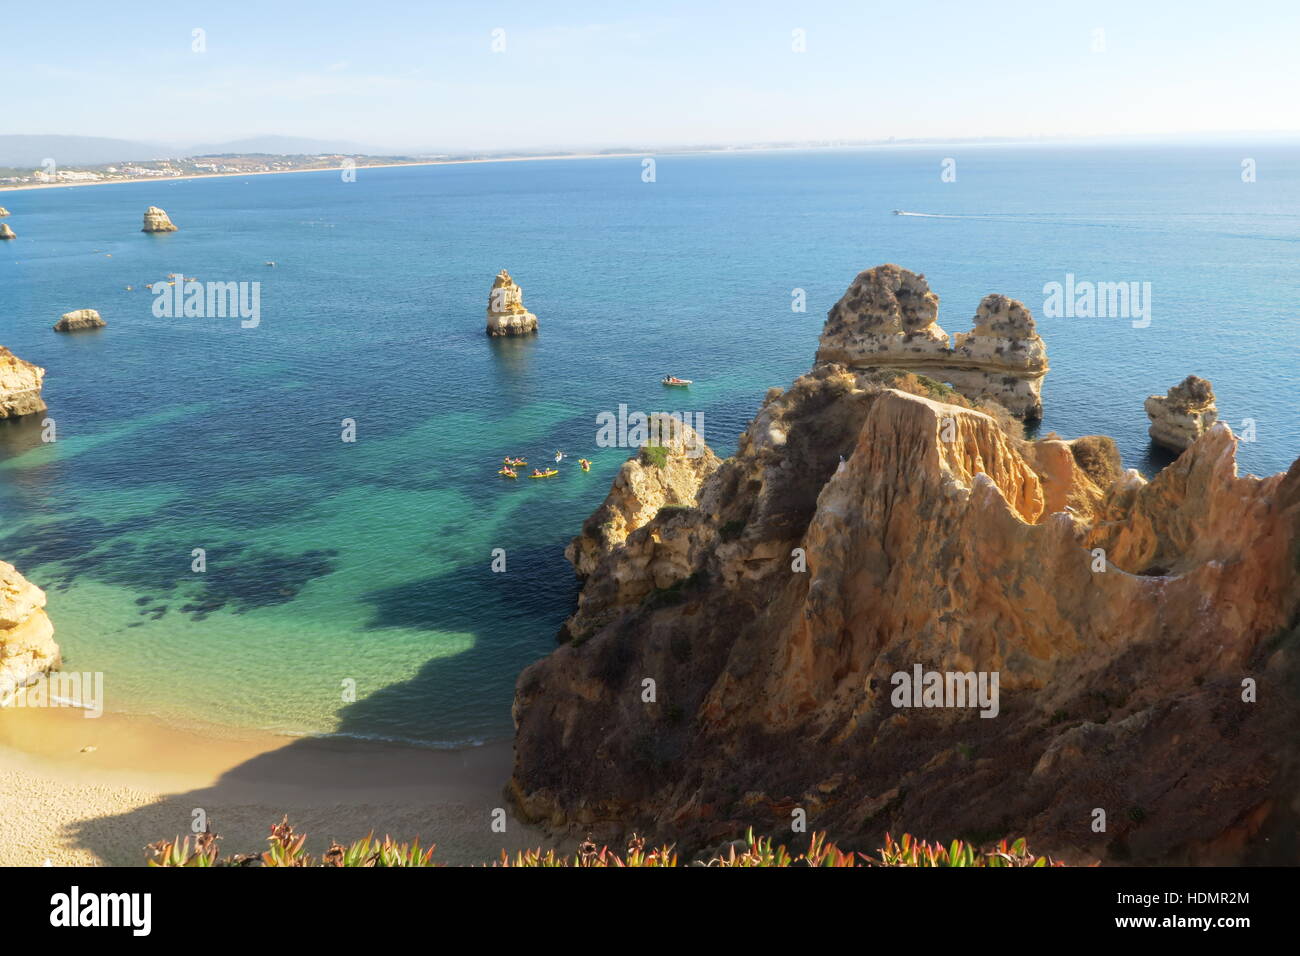 View into the ocean from above Praia do Camilo in Lagos, Portugal in summer. Stock Photo